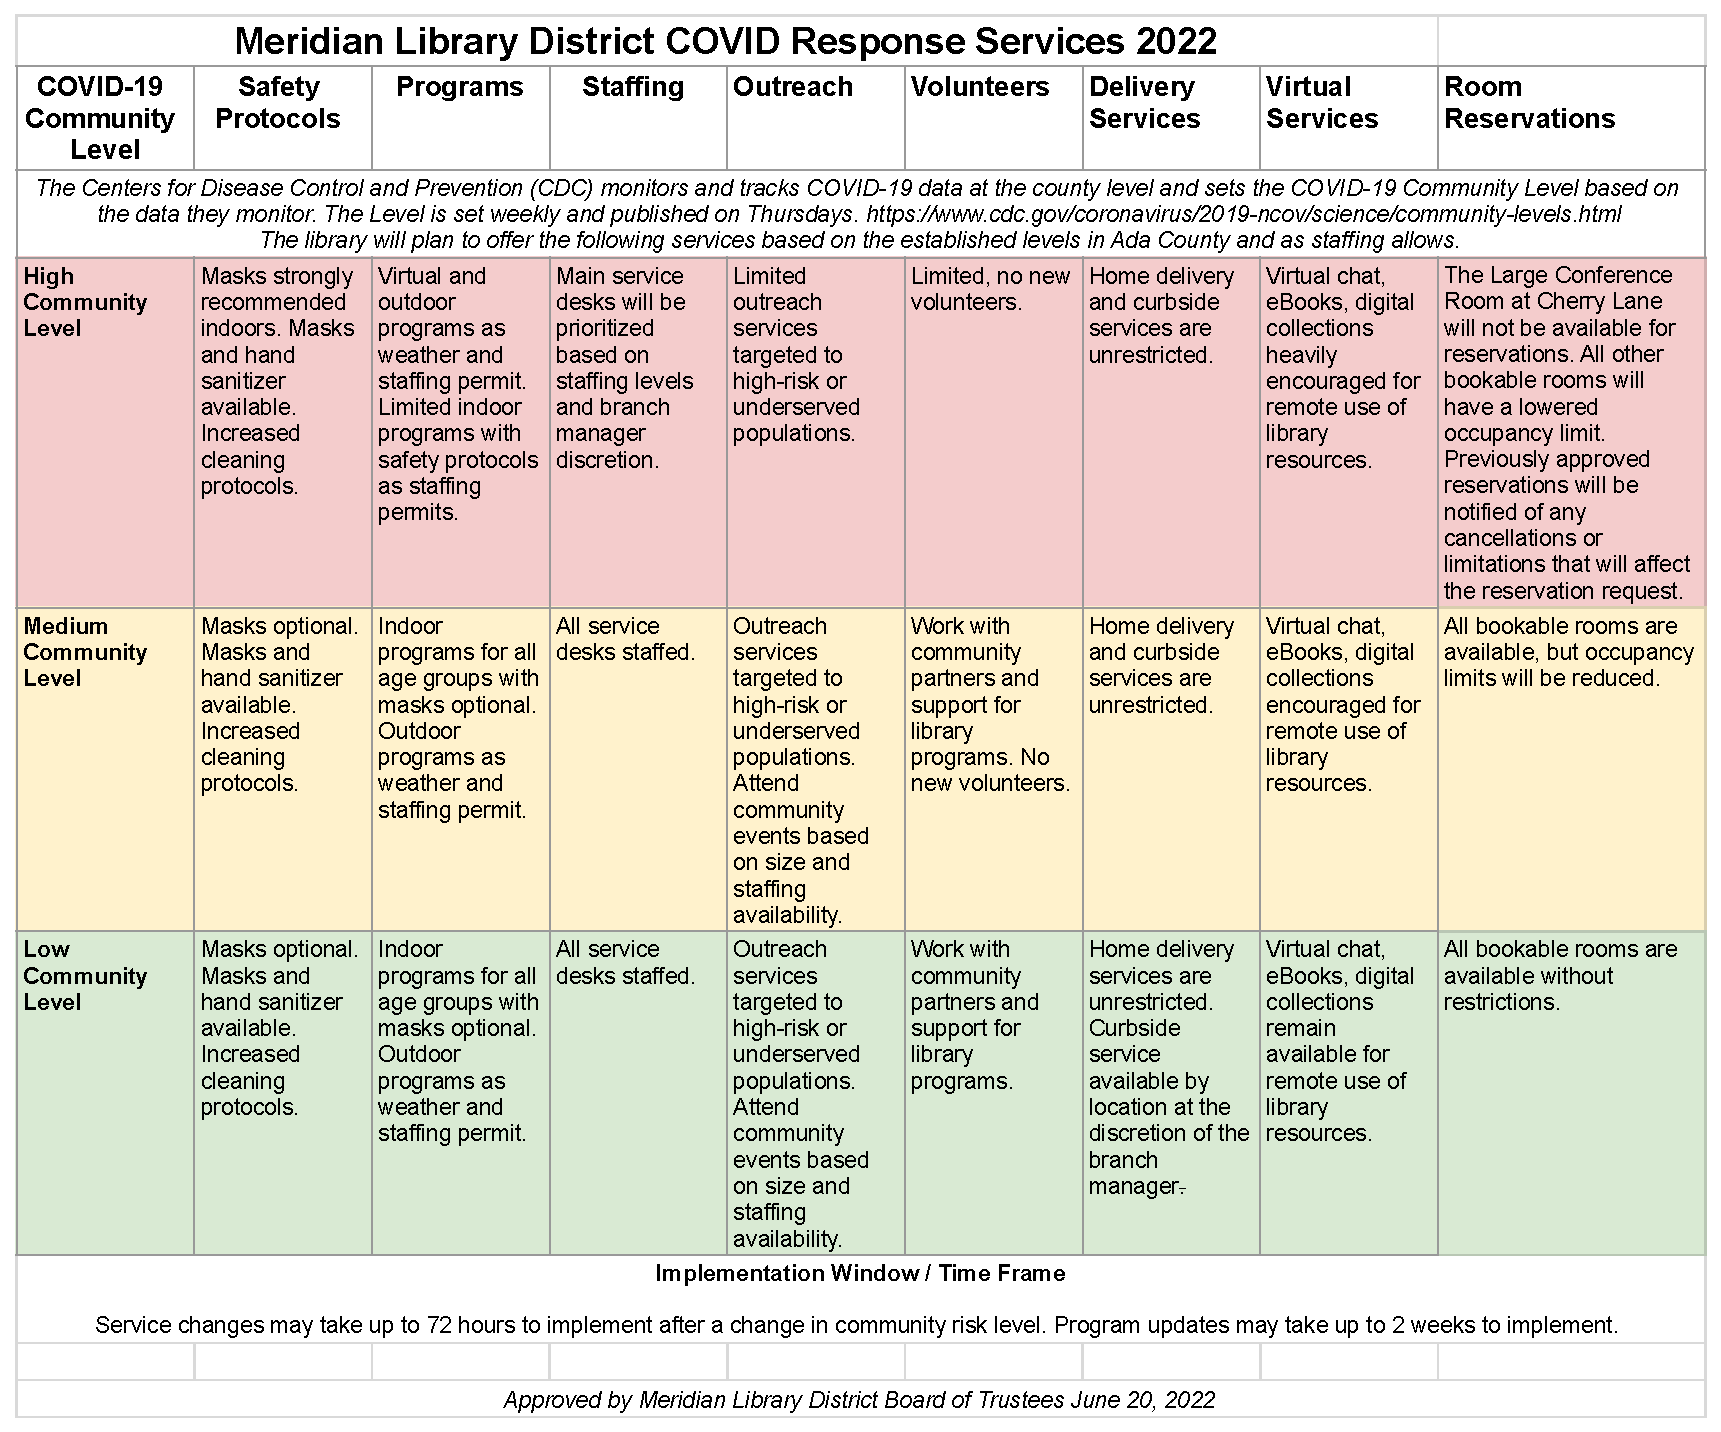 Meridian Library District COVID Operations Plan